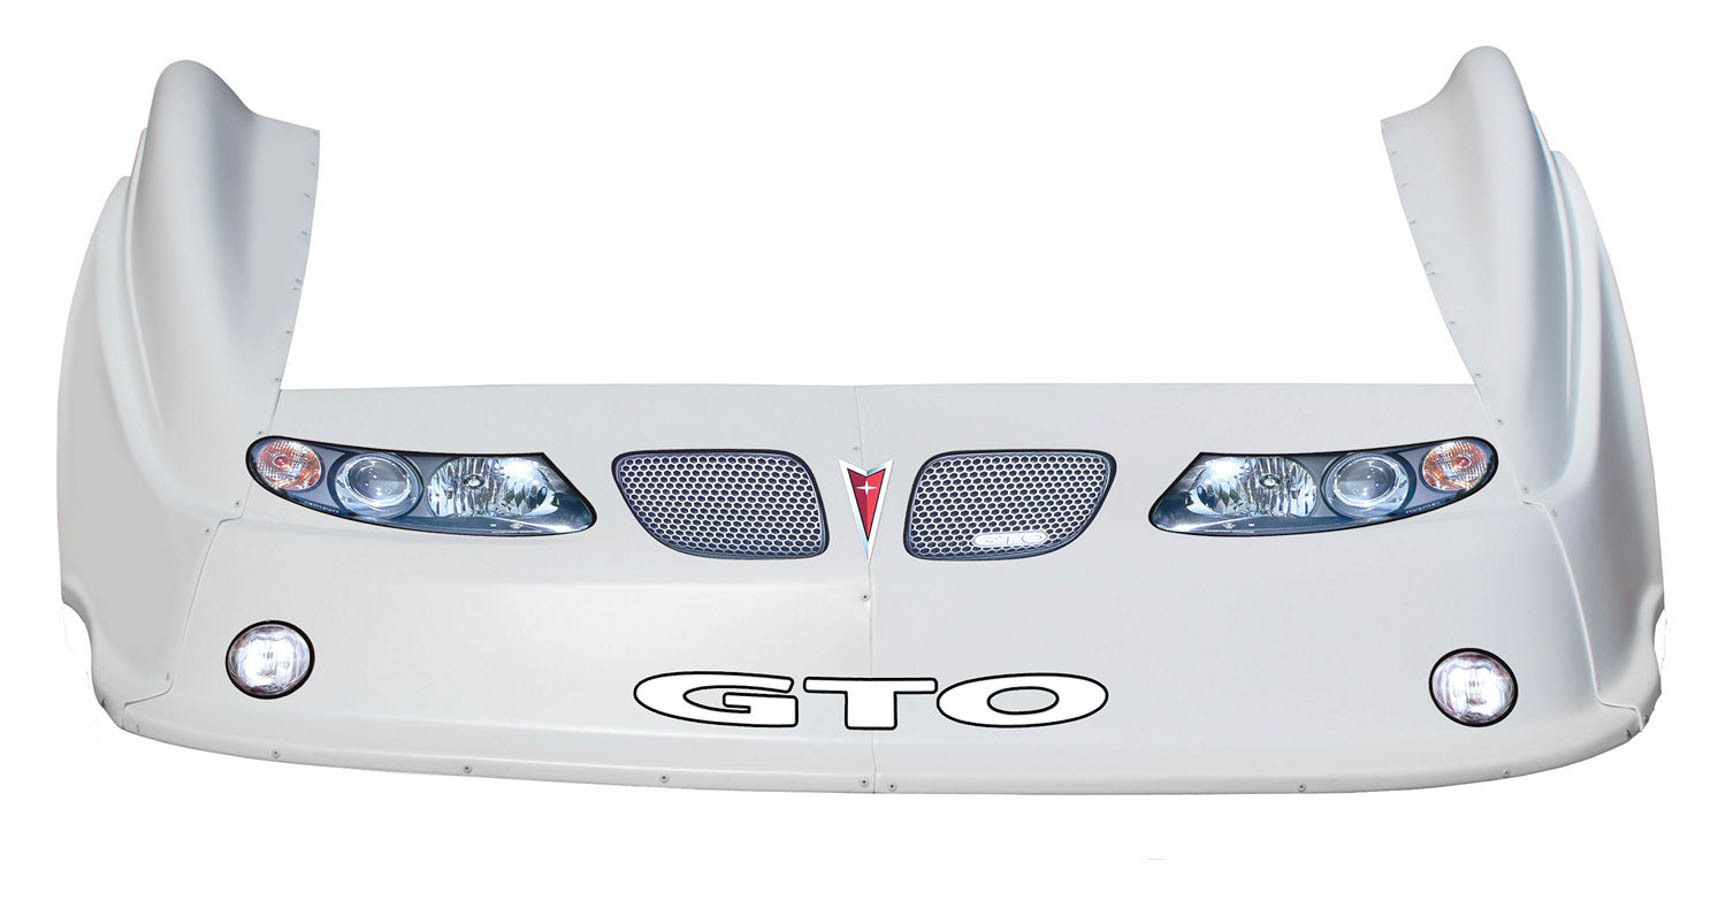 New Style Dirt MD3 Combo GTO White - 375-417W